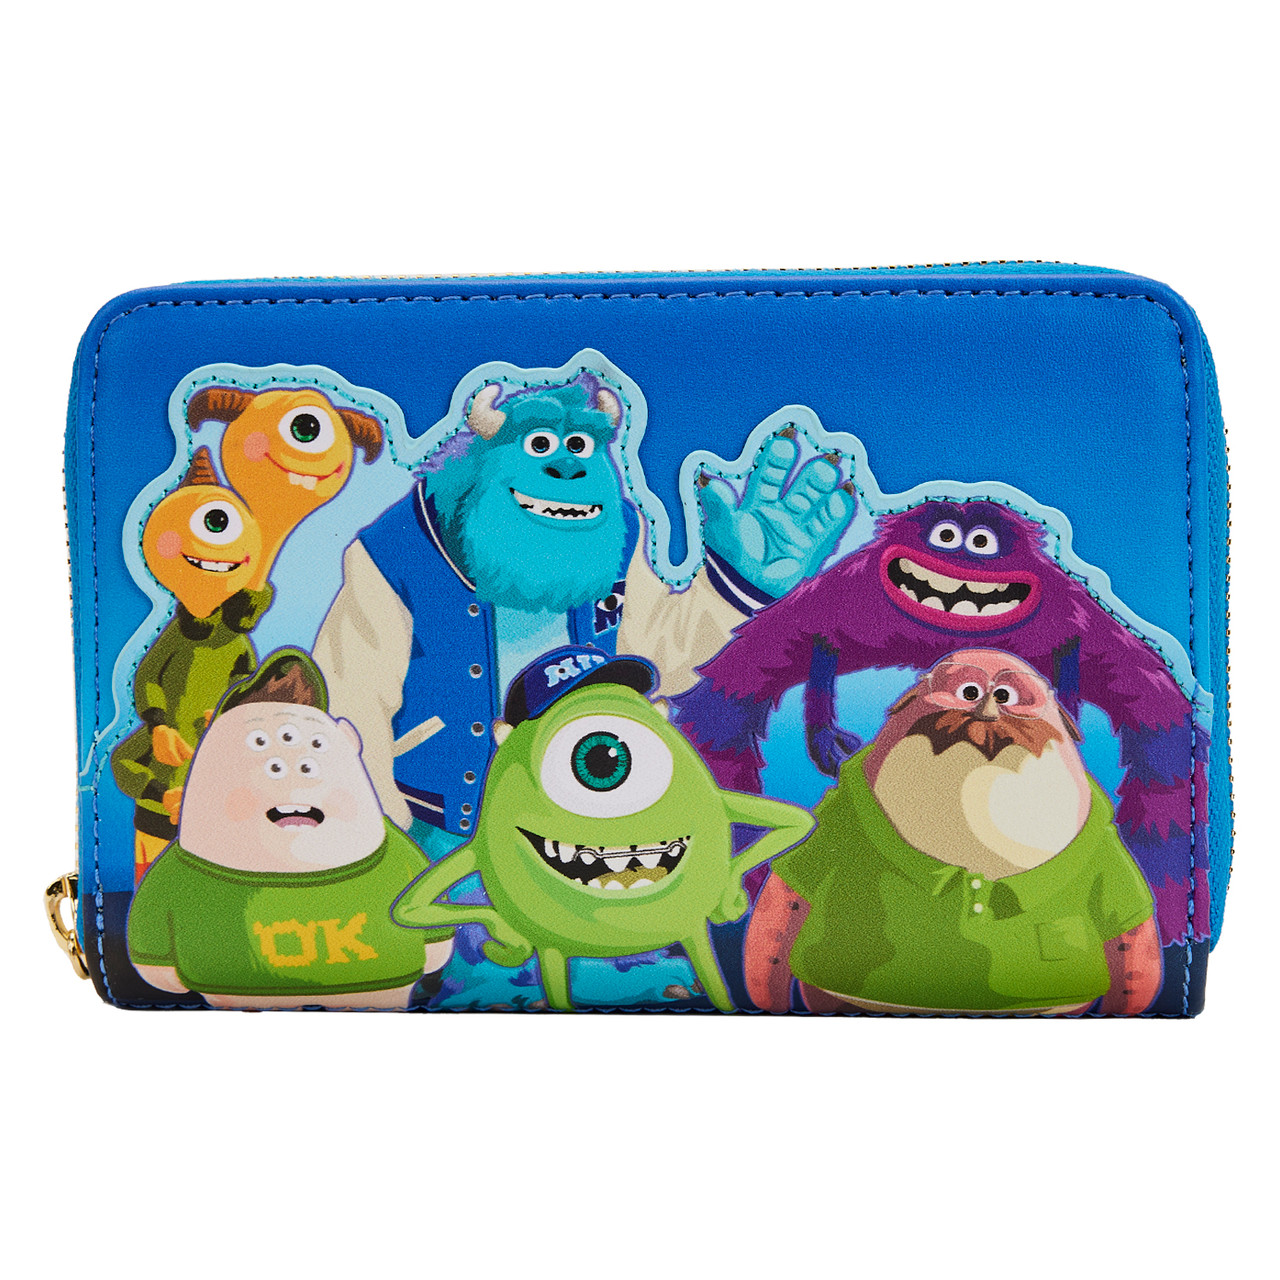 Disney-Pixar Monsters, Inc. Mike with Scare Can Mini-Backpack